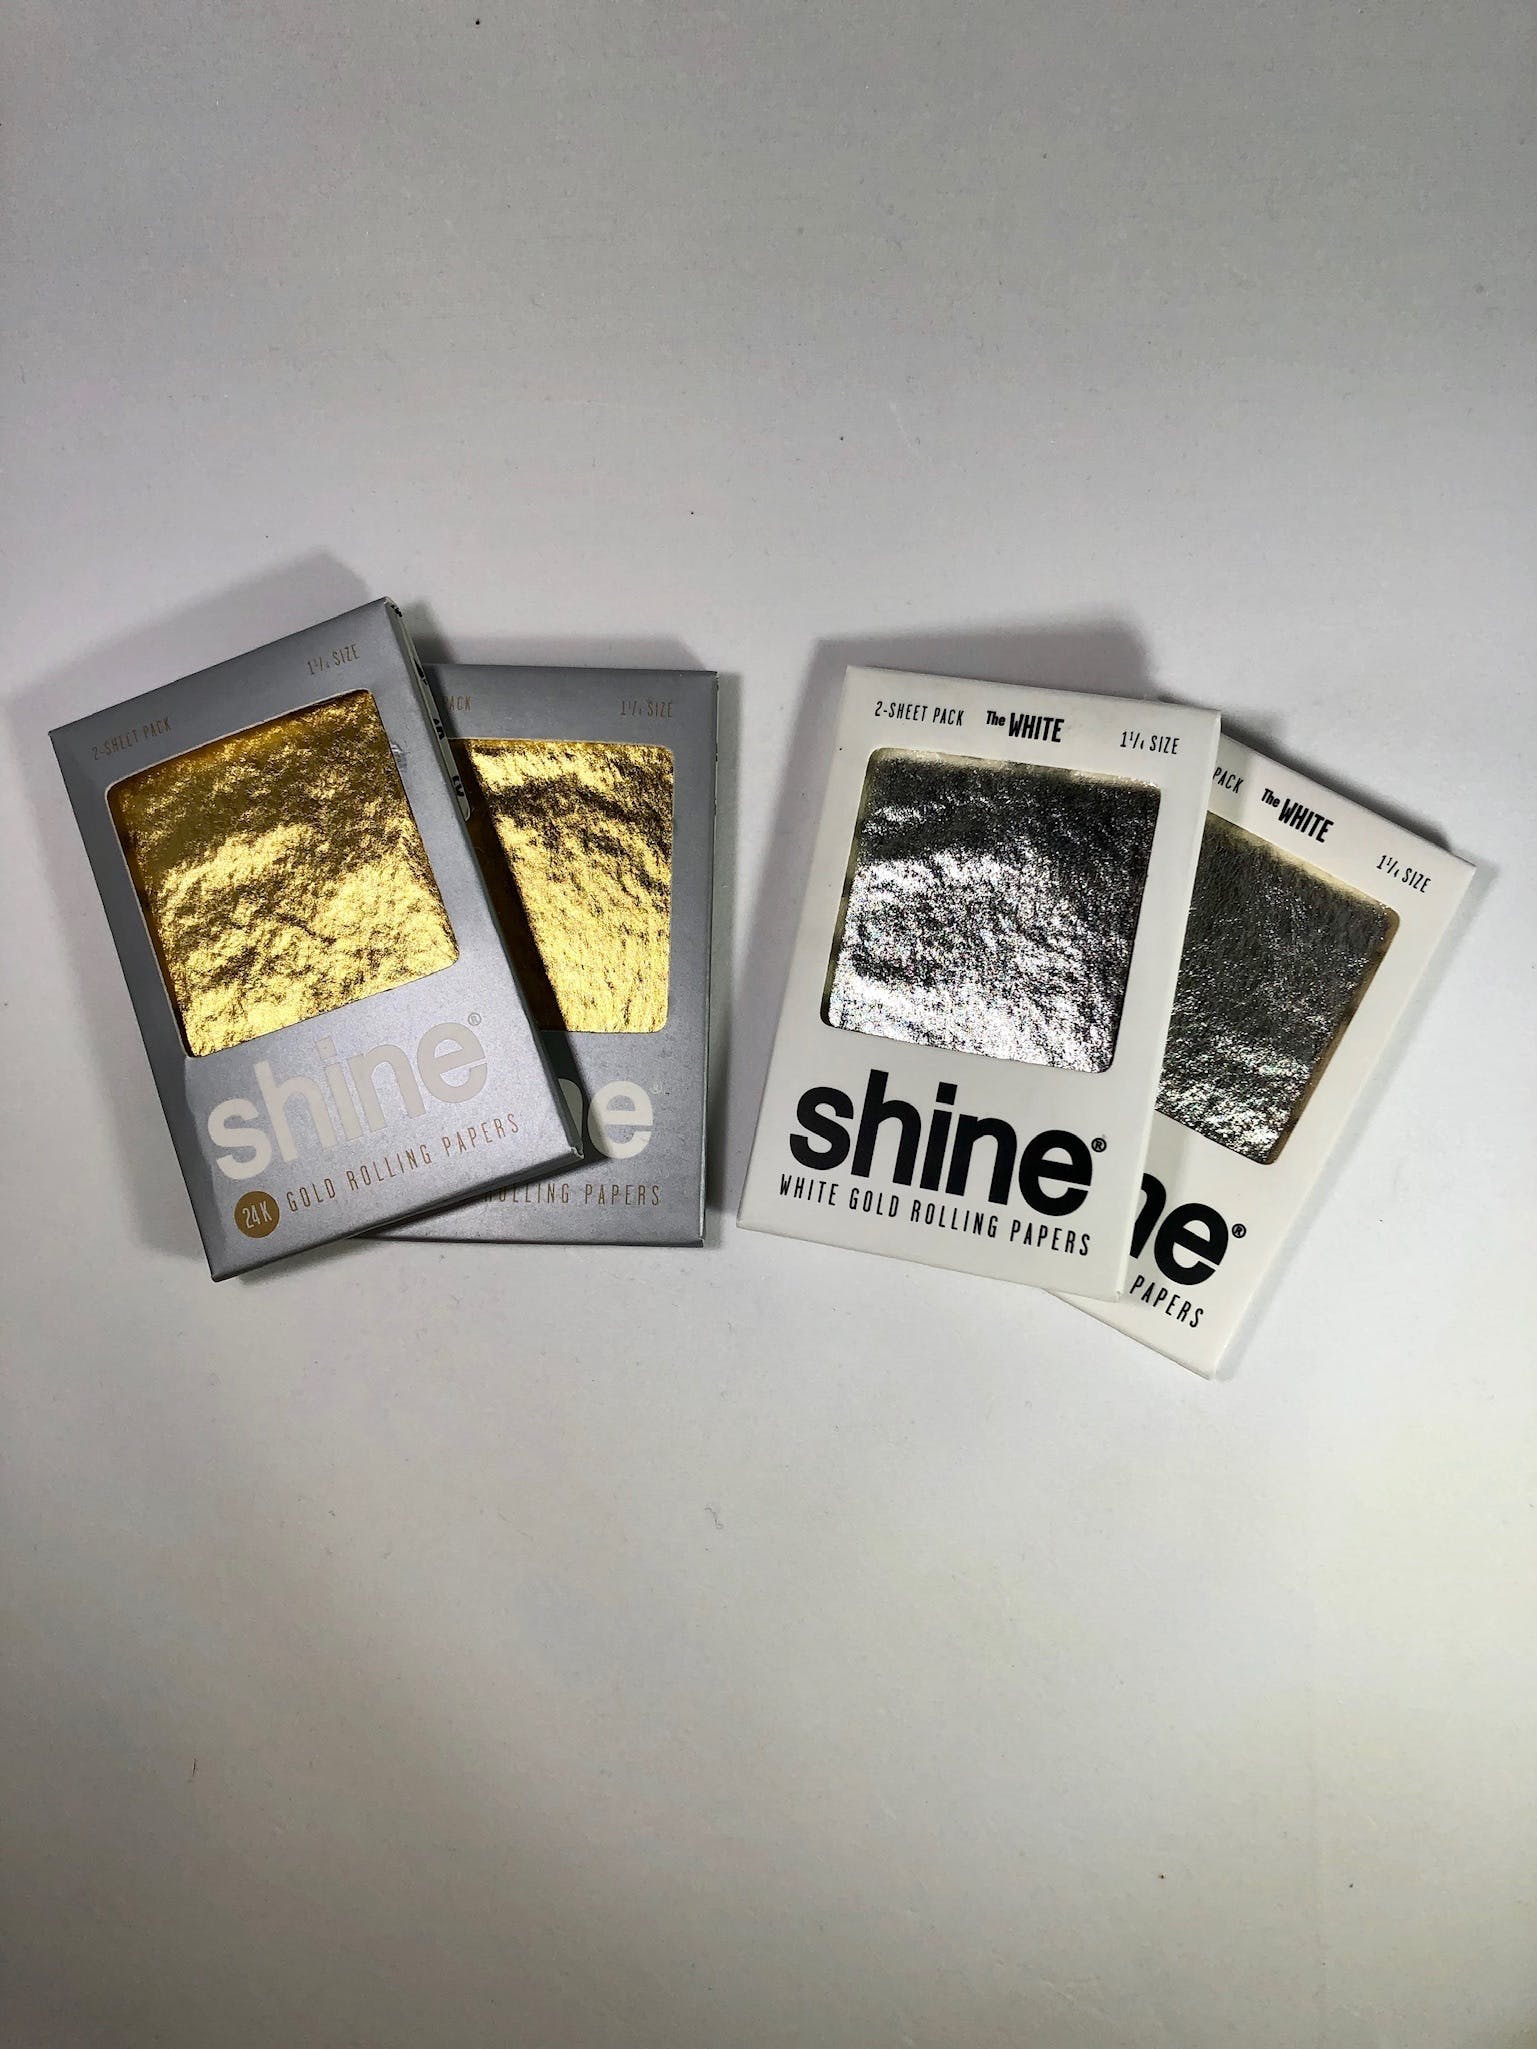 gear-shine-24k-gold-papers-2-sheets-1-14